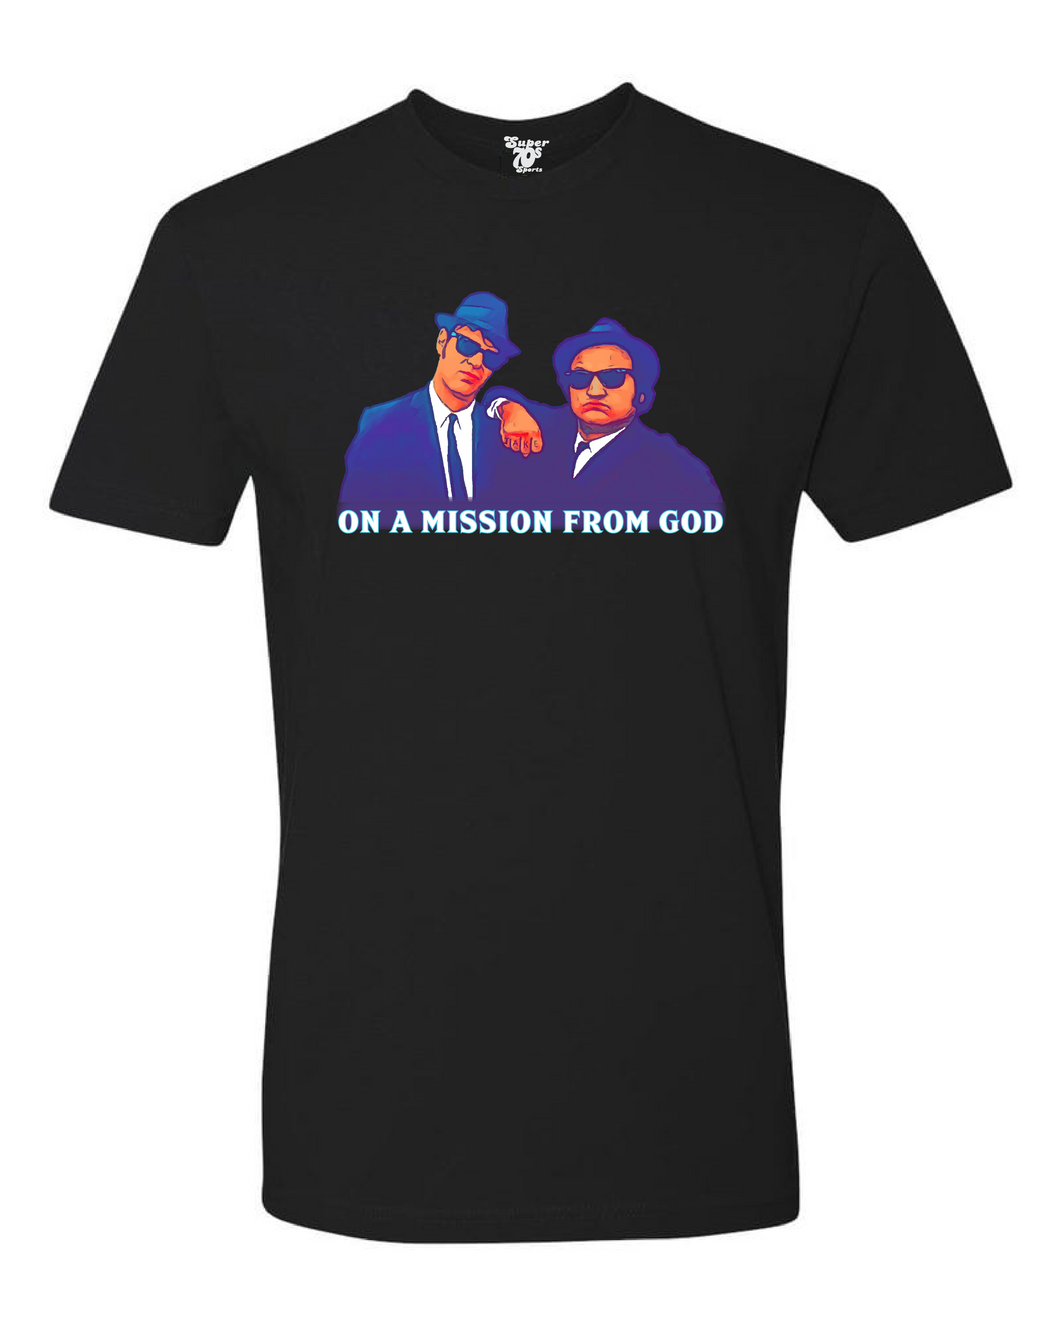 On a Mission from God Tee